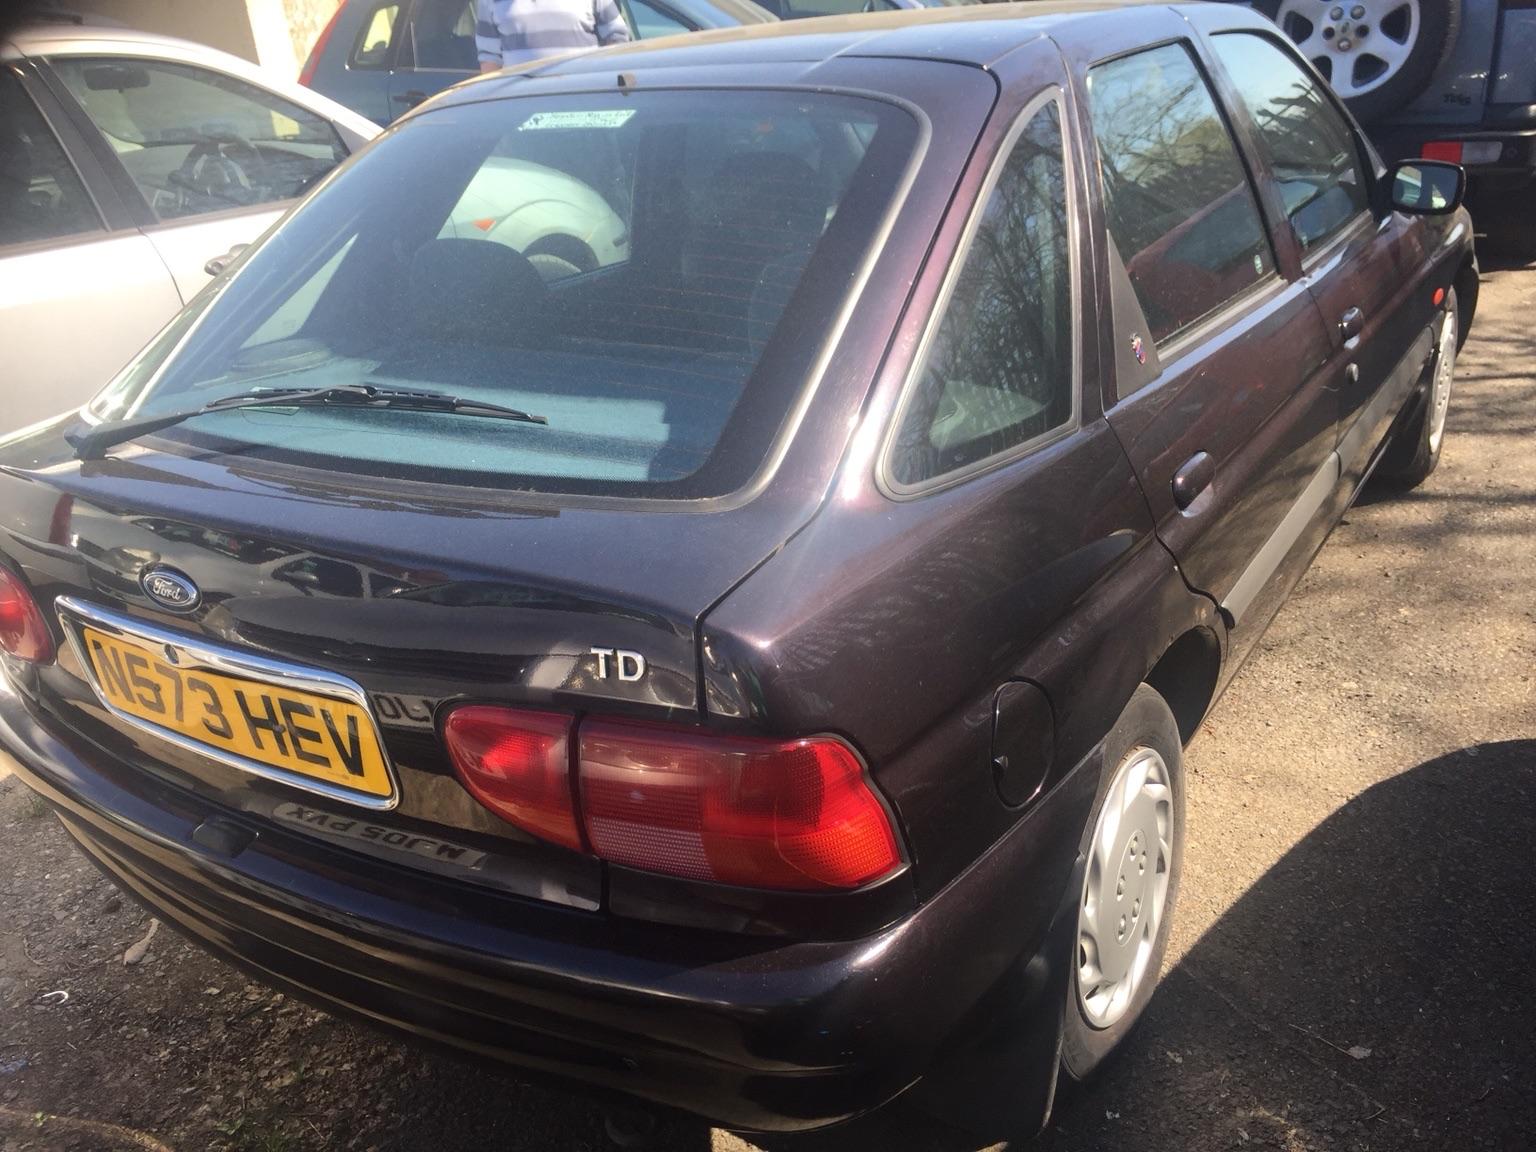 Ford escort 1.8 turbo diesel in Madeley for £325.00 for